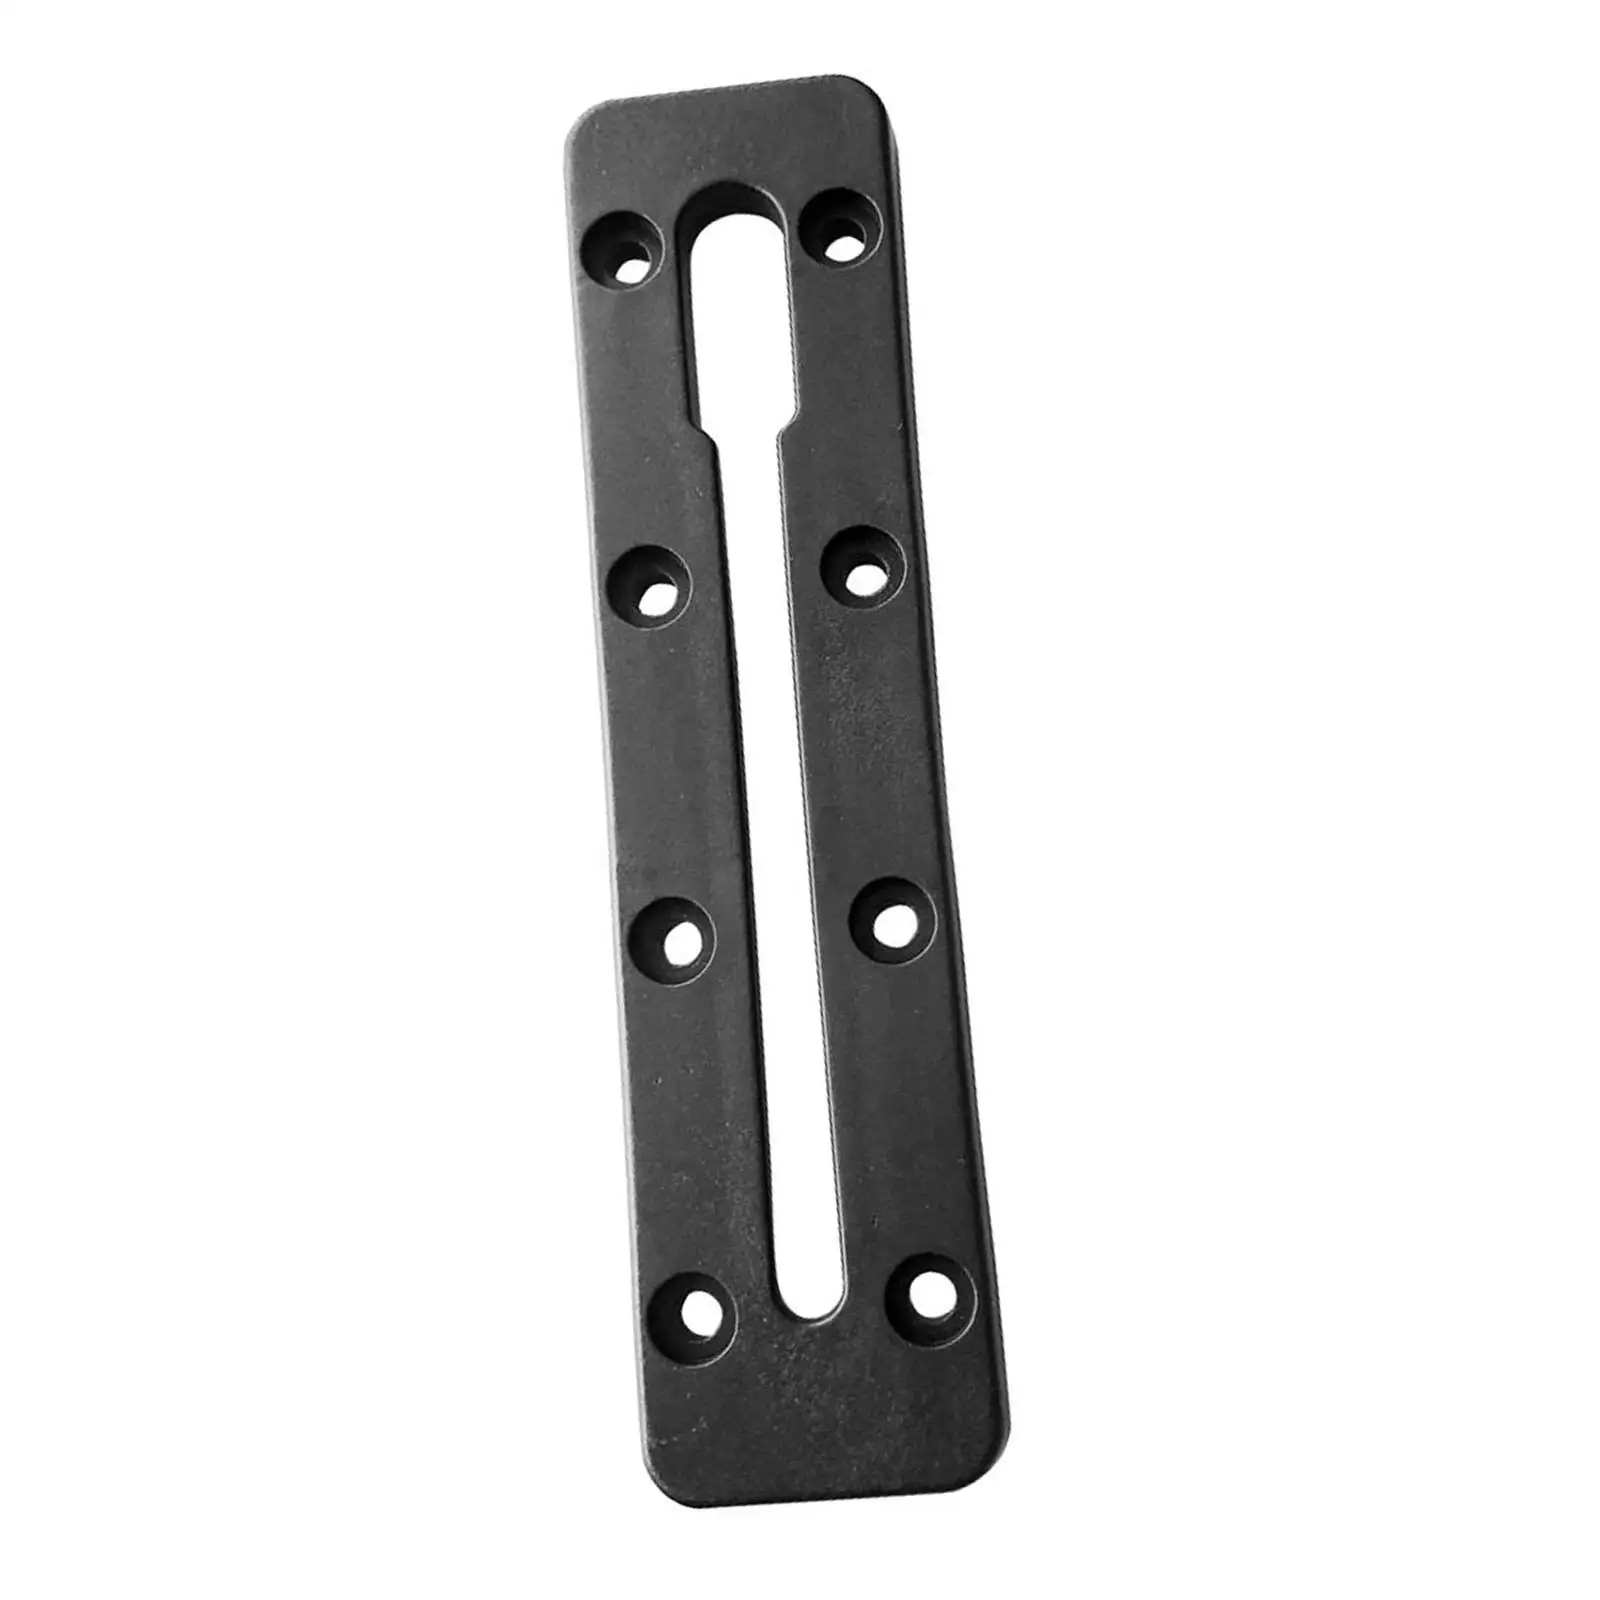 Kayak Slide Track Replaces Accessory Durable DIY Accessories Mounting Base Rack